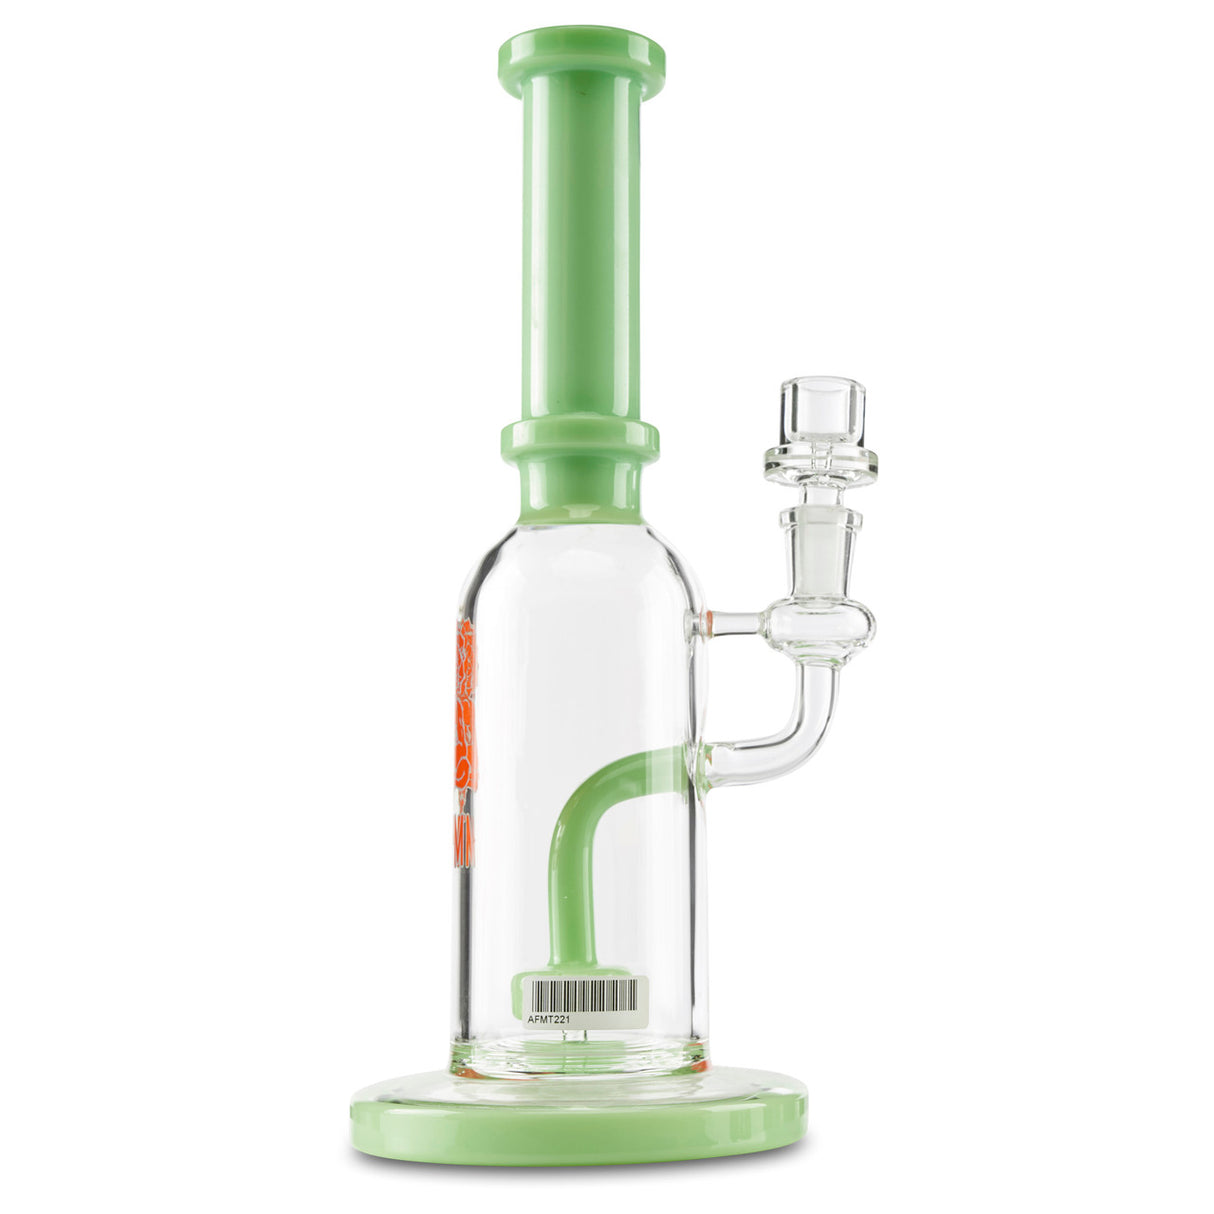 afm showerhead water pipe bong for smoking dry herbs and flower